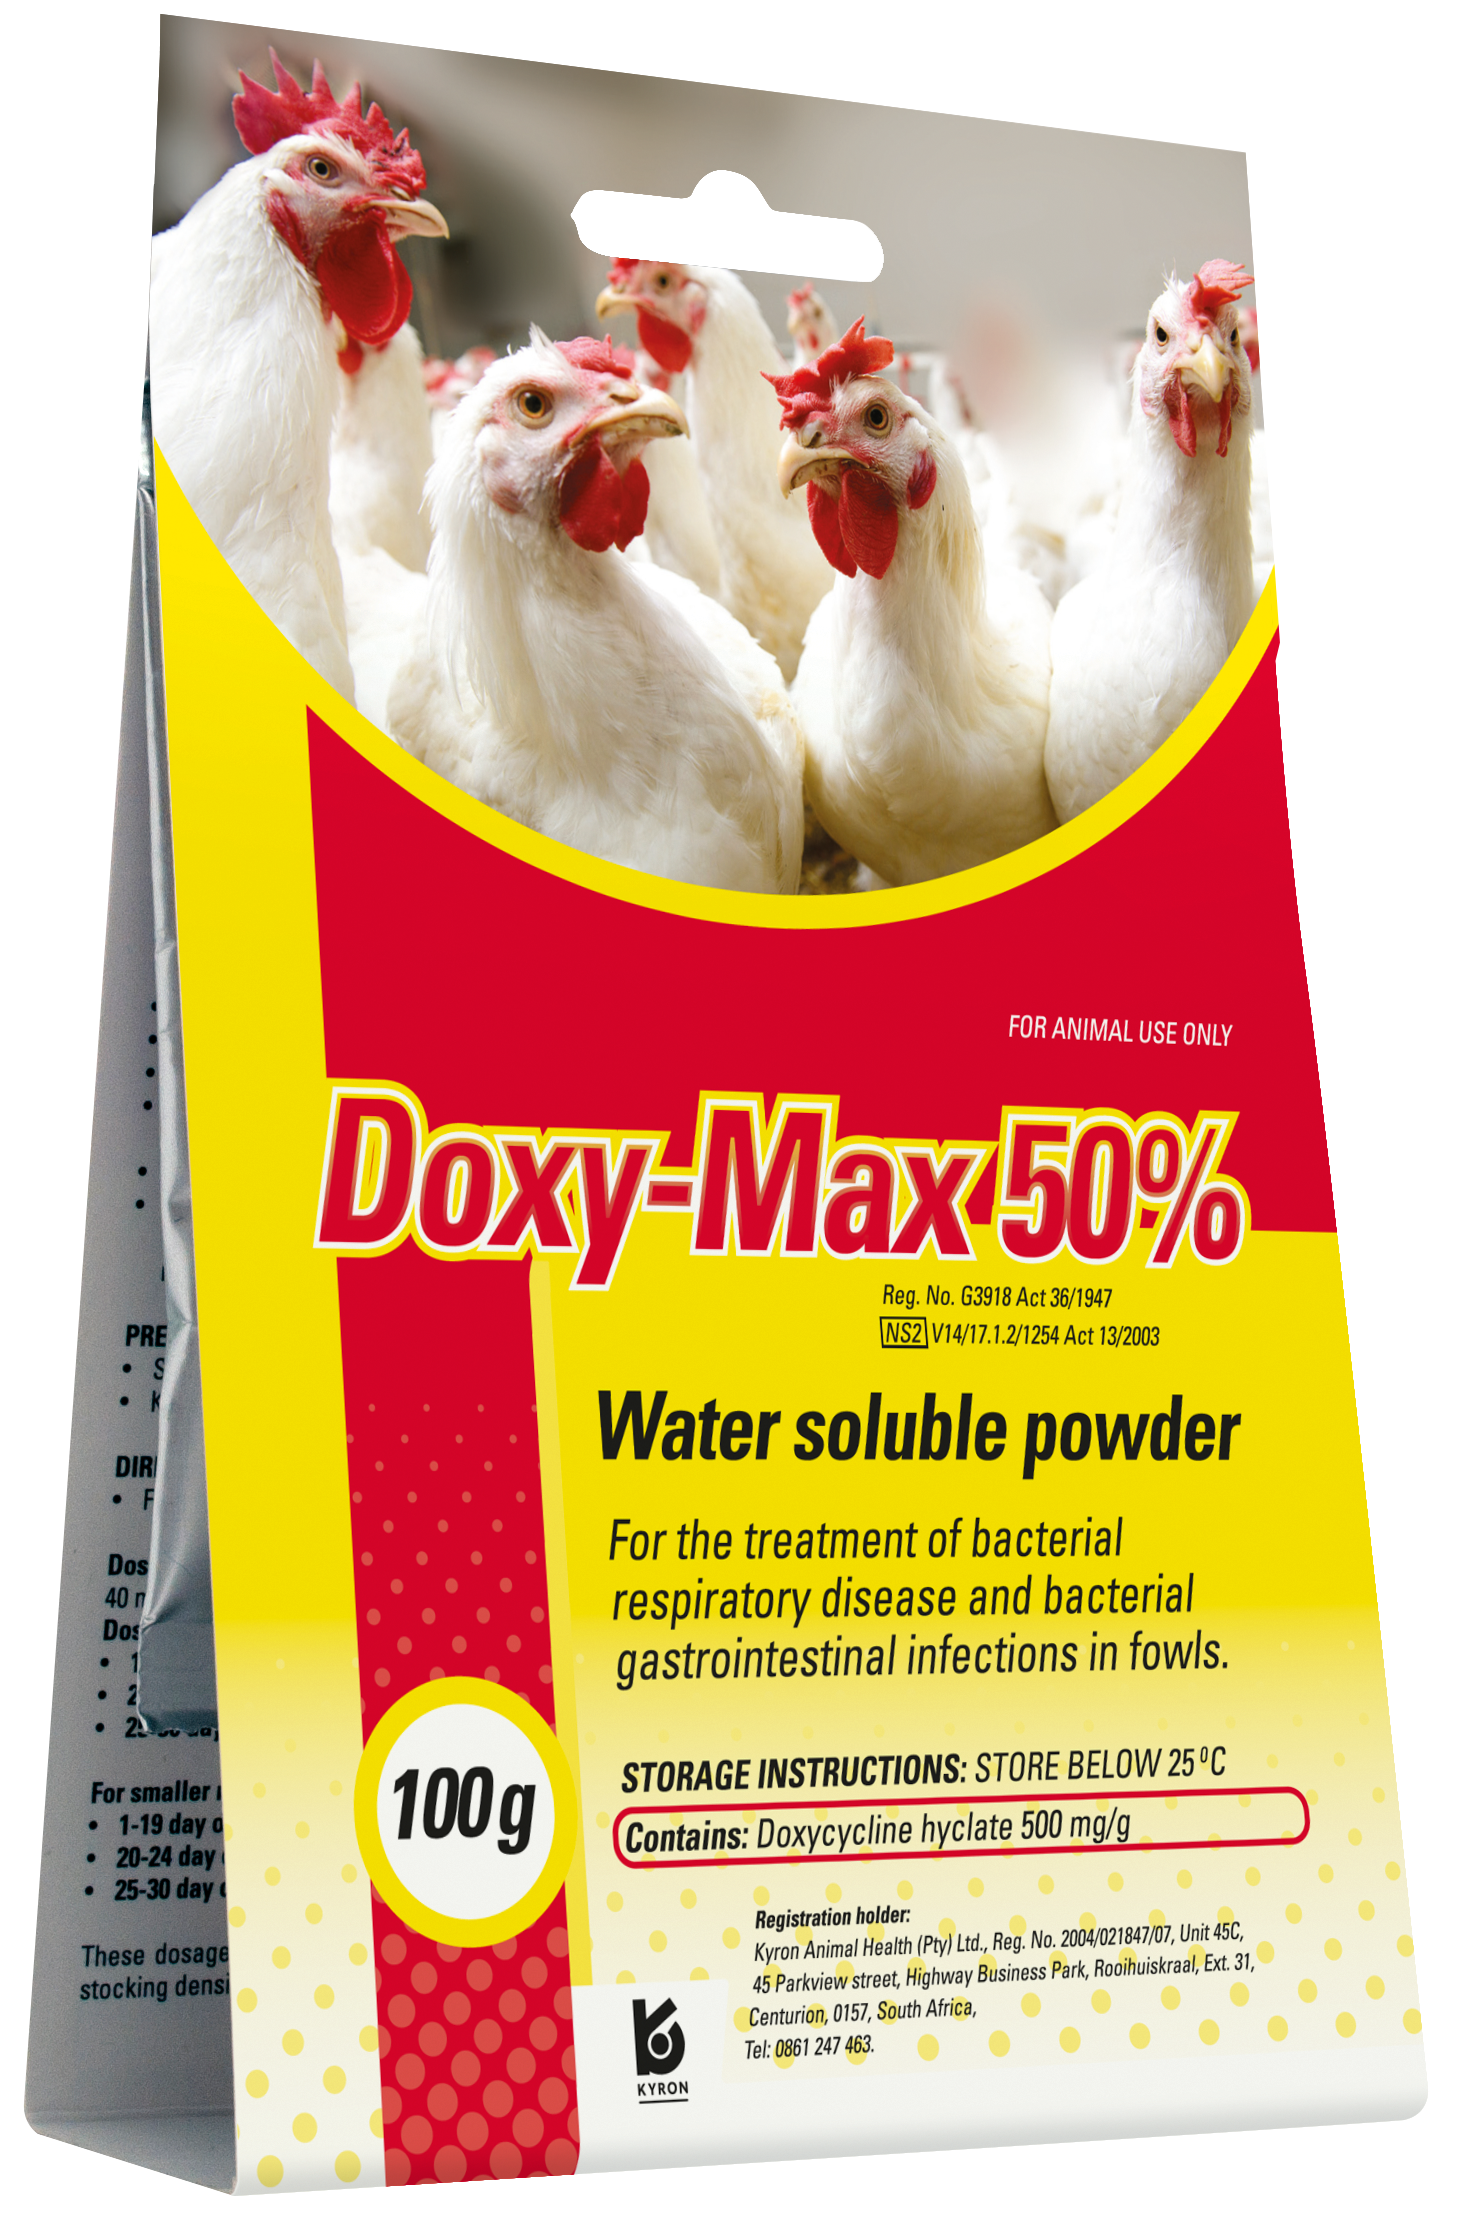 Water soluble powder for the treatment of bacterial respiratory disease and bacterial gastrointestinal infections in fowls.